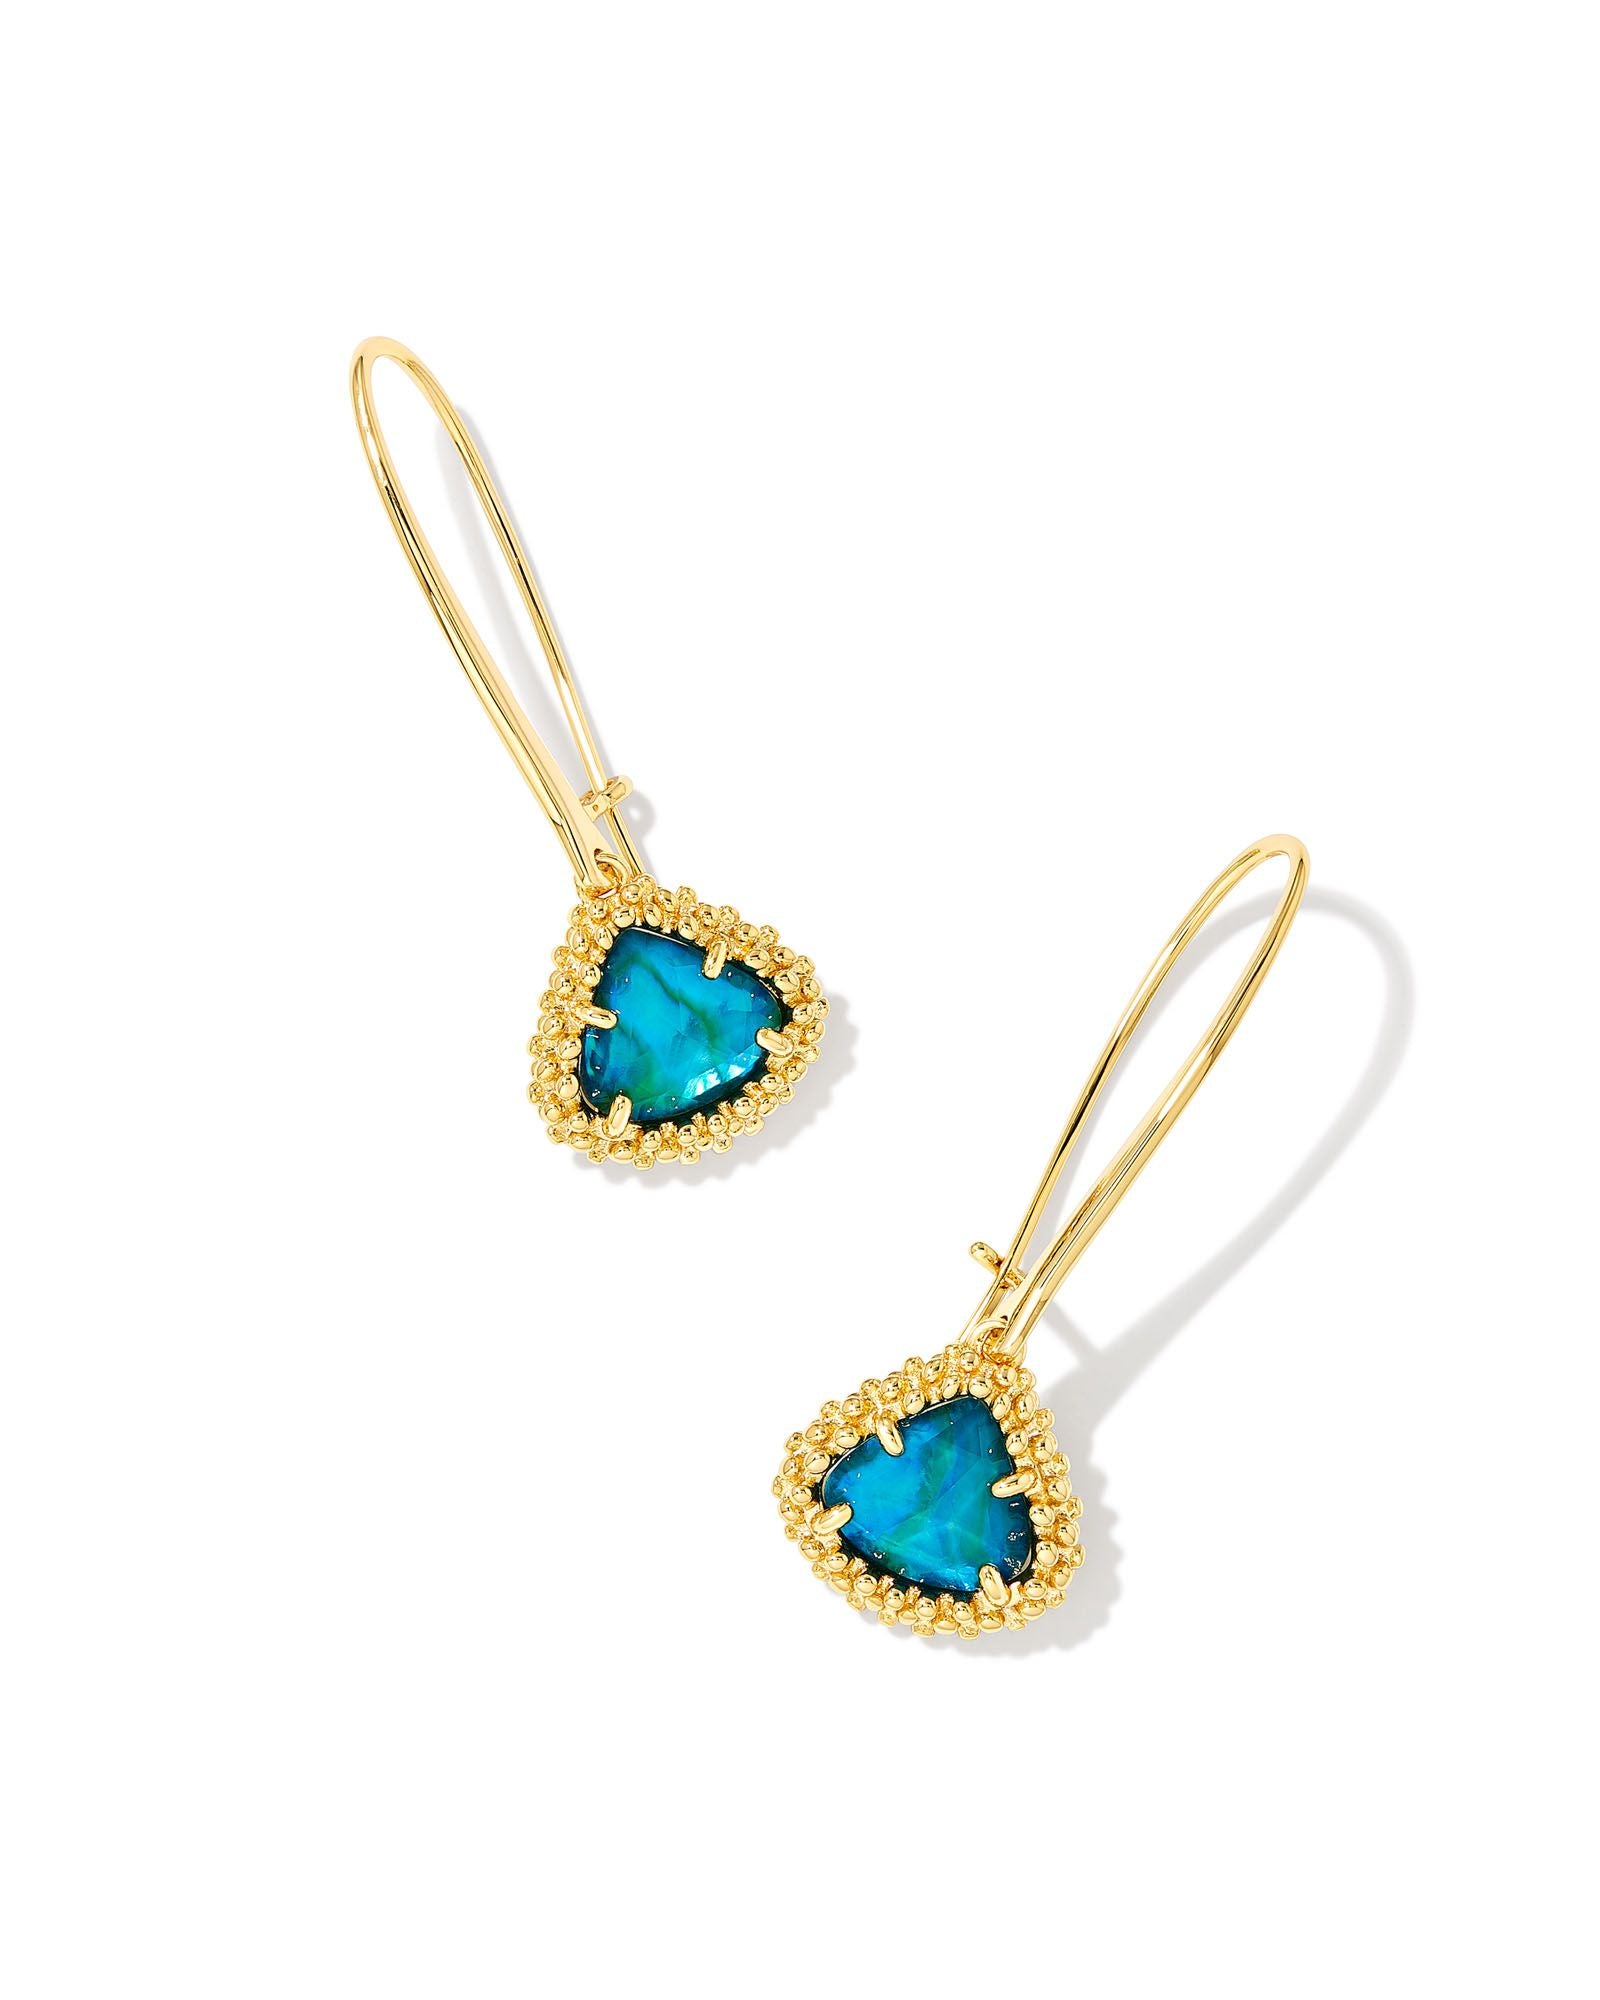 Framed Kendall Wire Drop Earring in Gold Teal Abalone